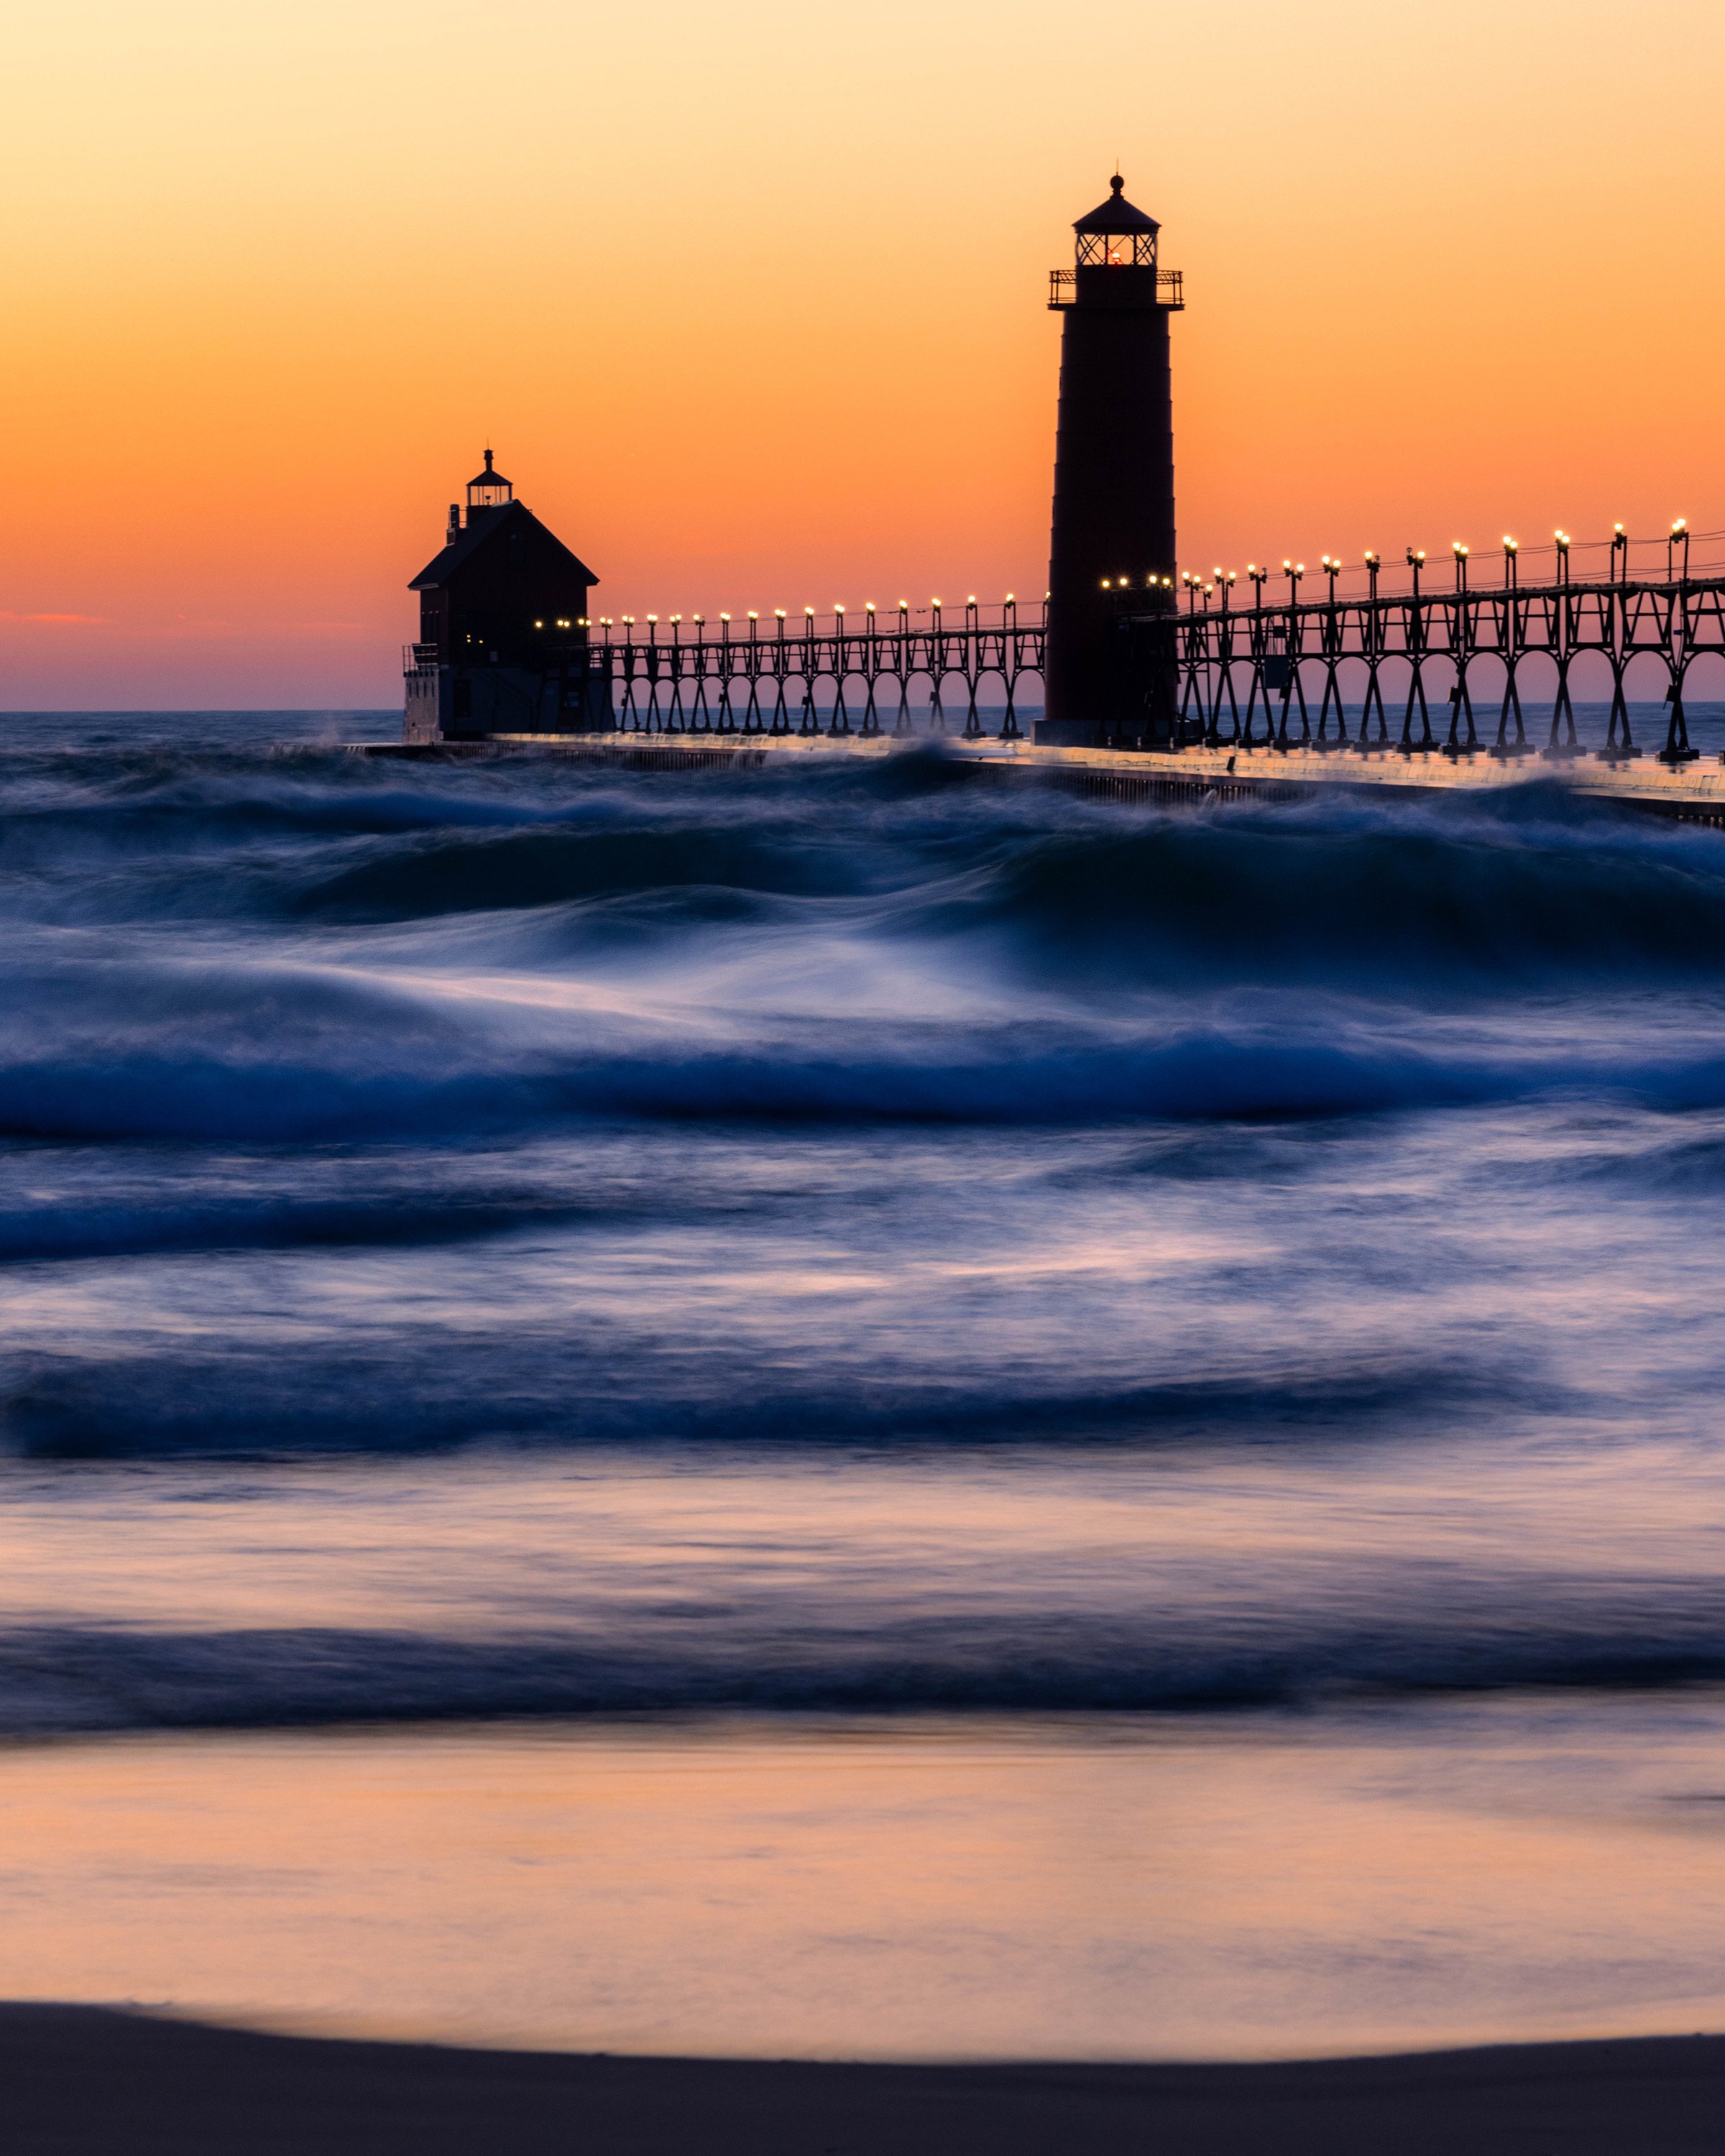  Busy waves in the afterglow, Grand Haven, MI 